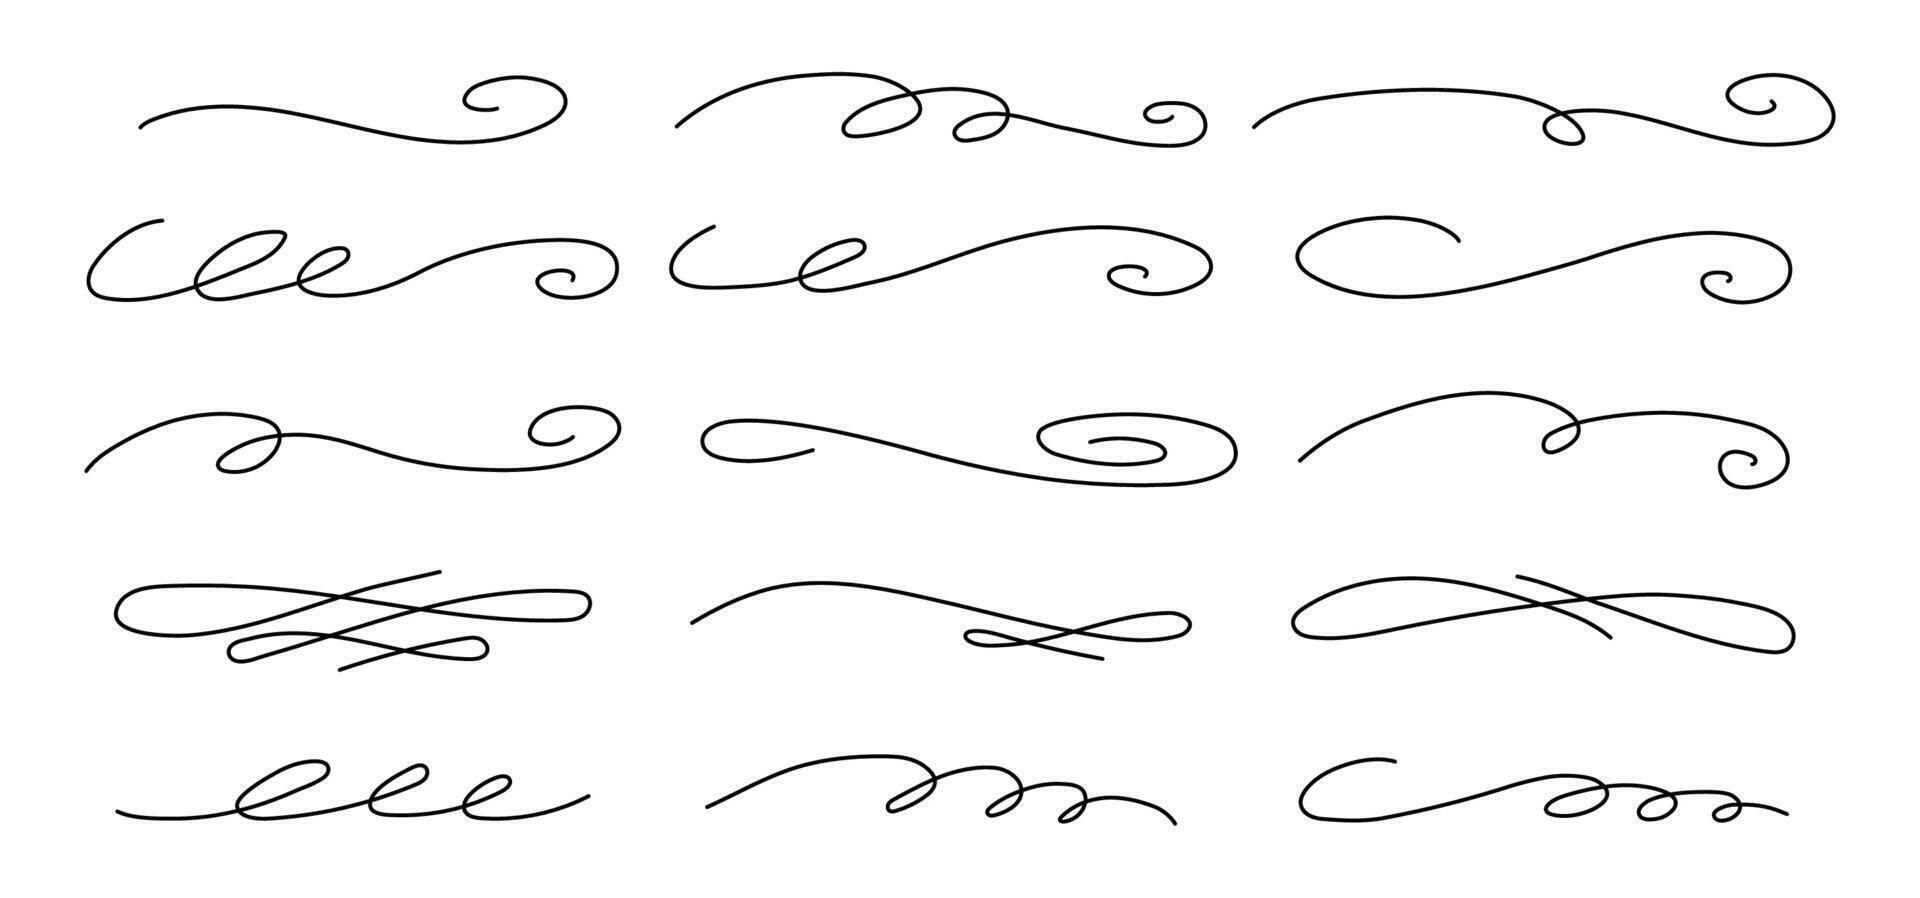 Calligraphy swashes, swoops. Decorative outline editable design elements. vector